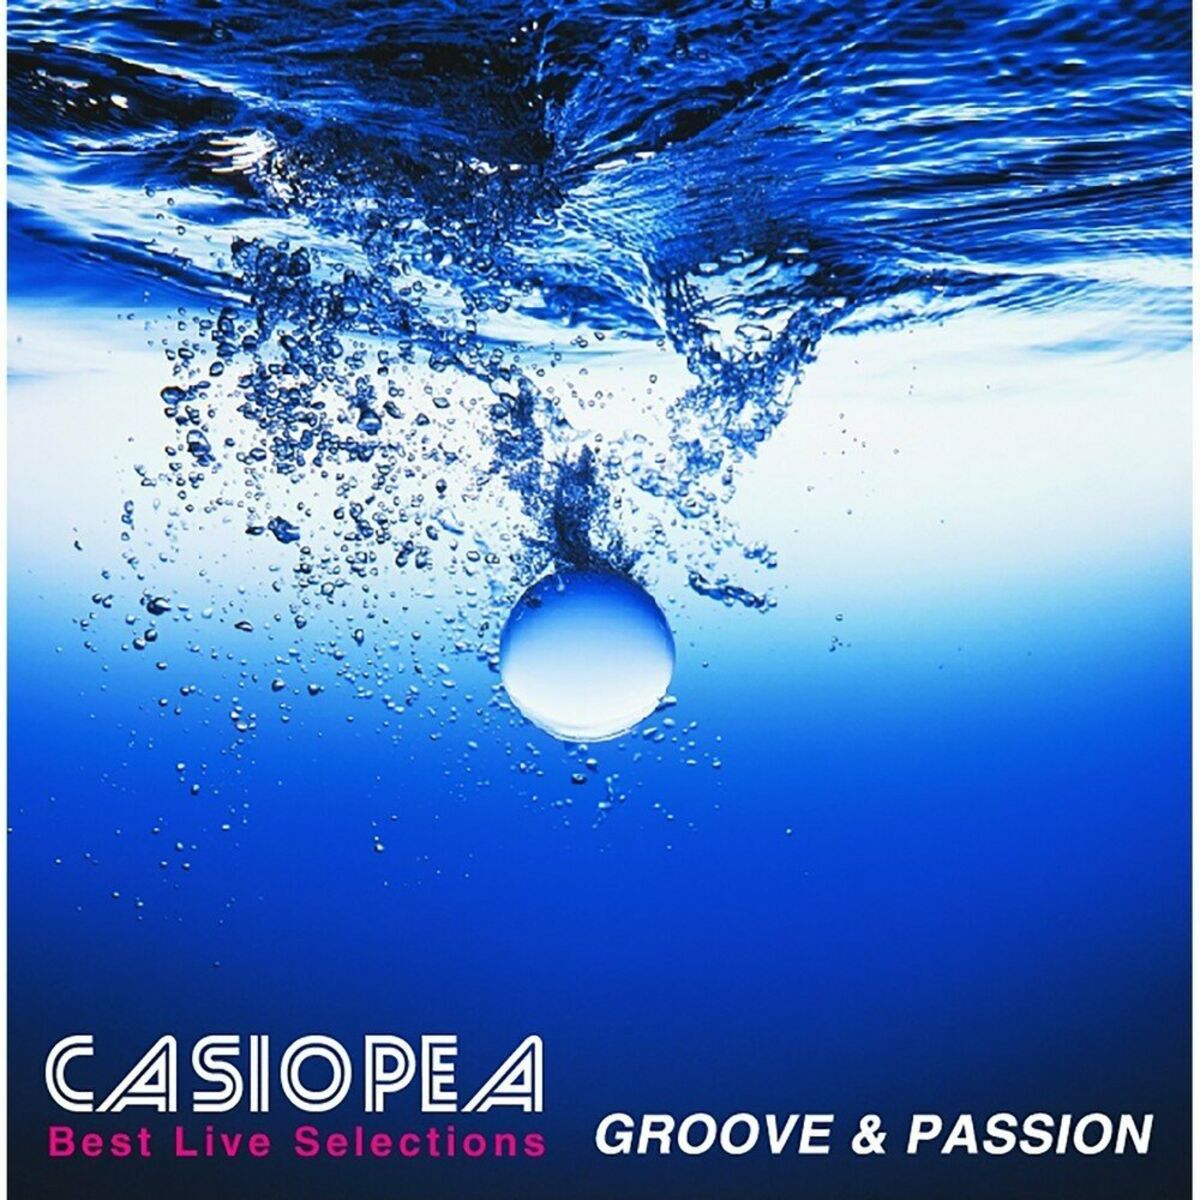 Casiopea - LIVING ON A FEELING - CASIOPEA night selection: lyrics and songs  | Deezer